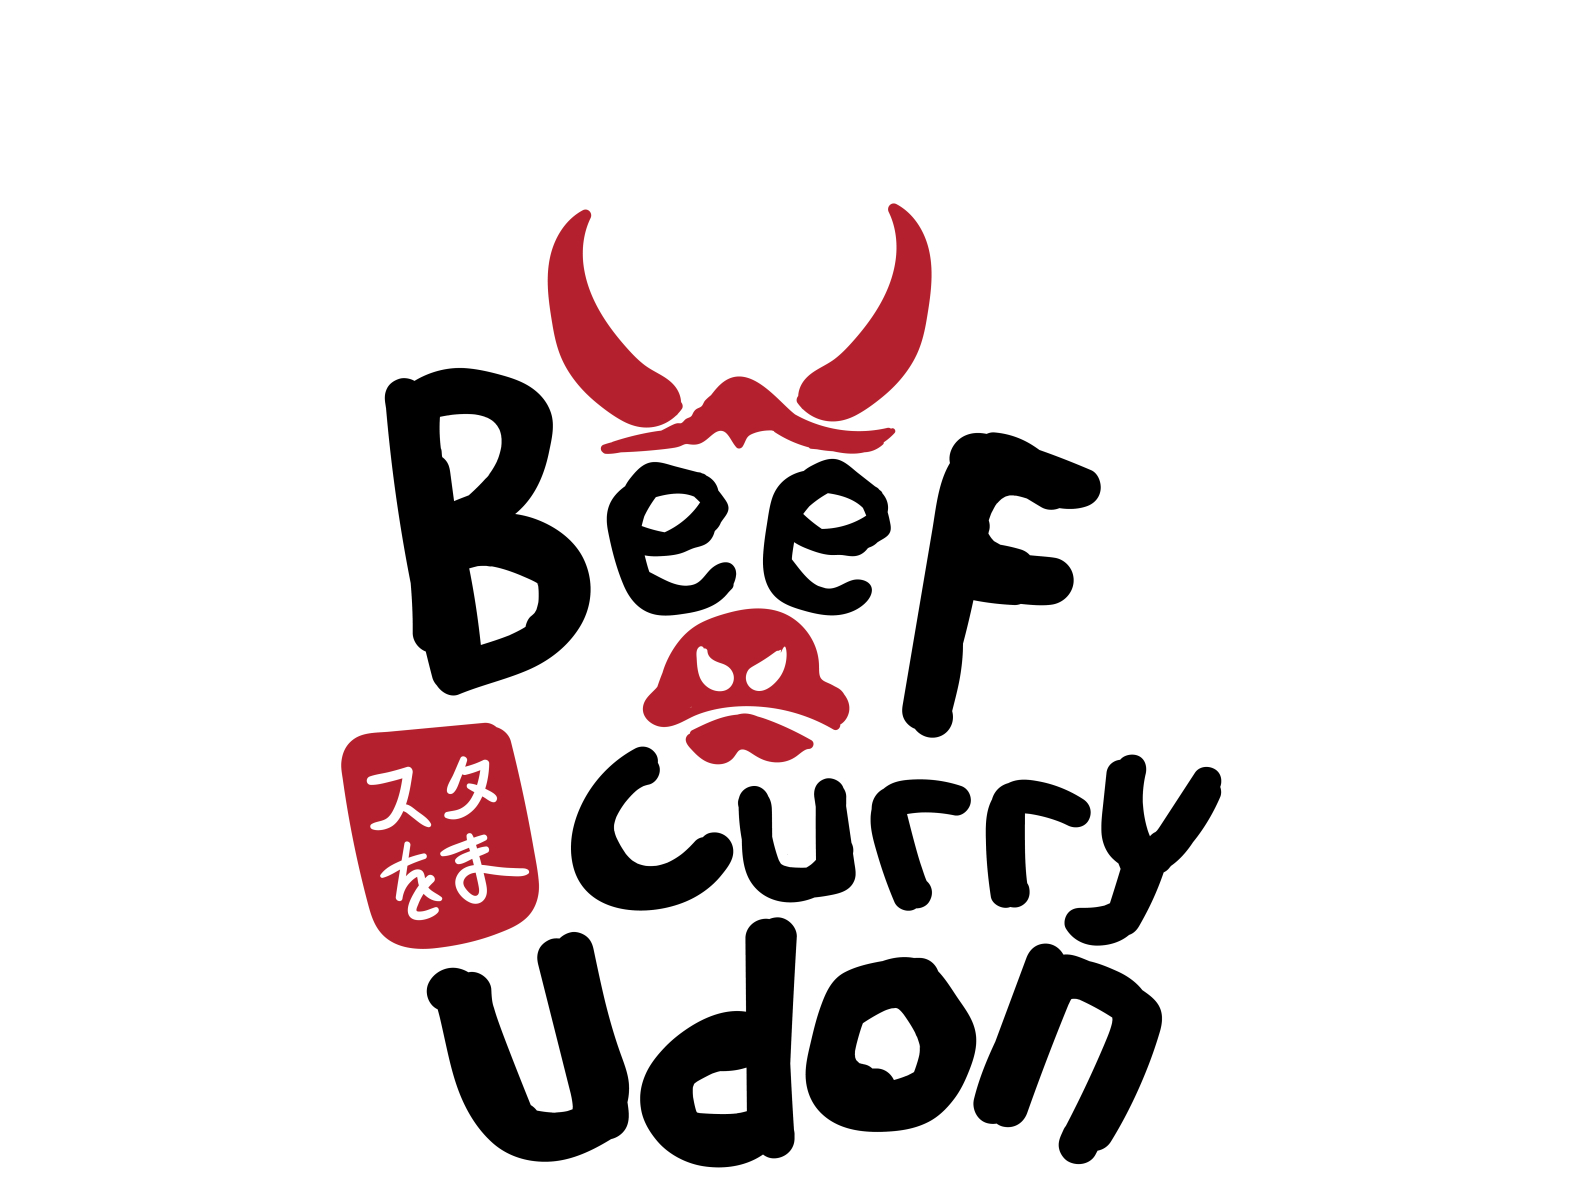 Beef Curry Udon Logo Concept by Lawang Logo on Dribbble